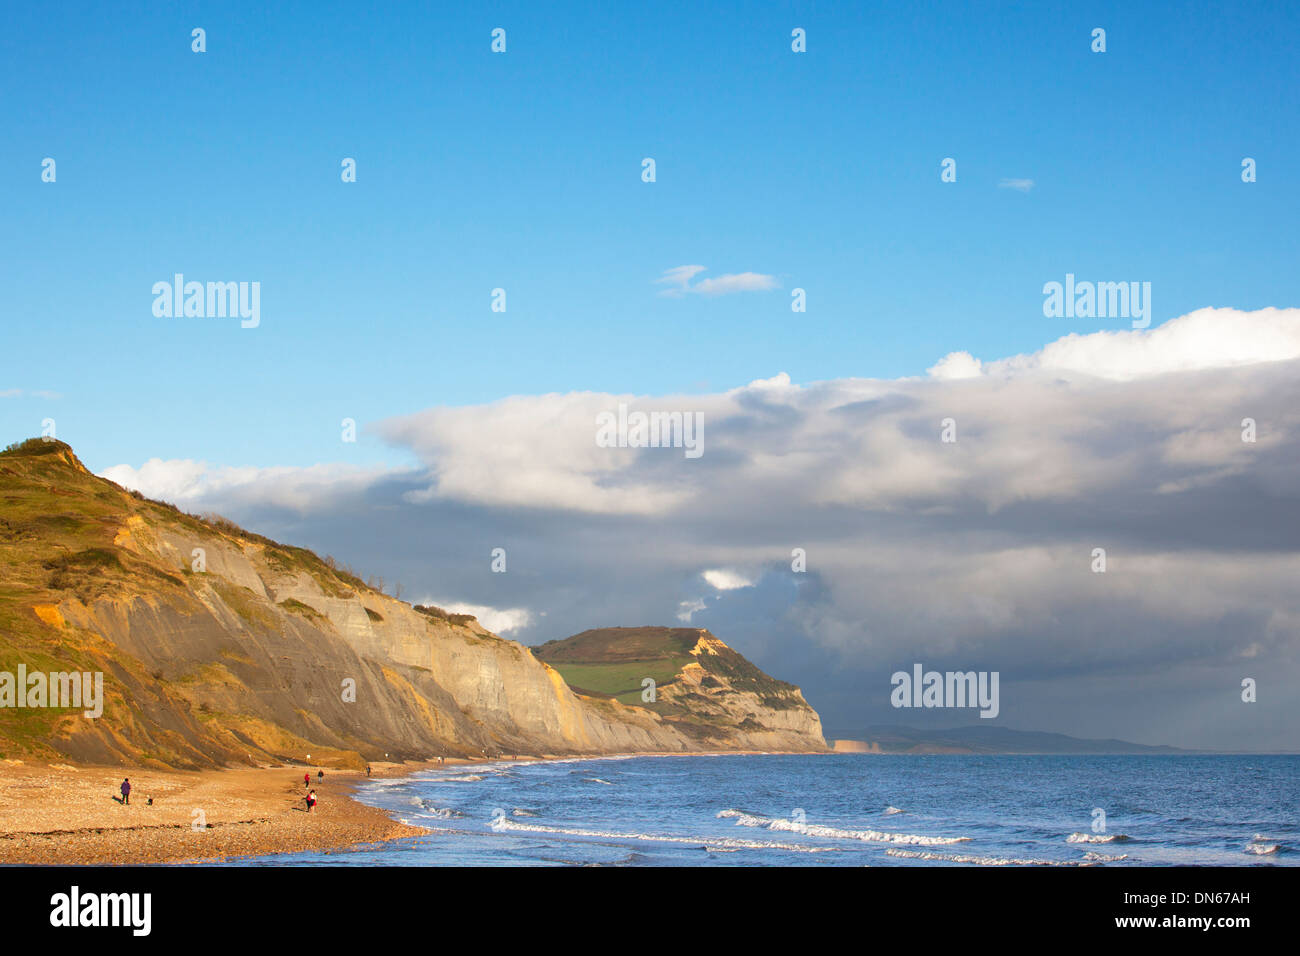 View of Golden Cap on the Jurassic Coast, Dorset, England viewed from Charmouth with fossil hunters on the beach. Stock Photo